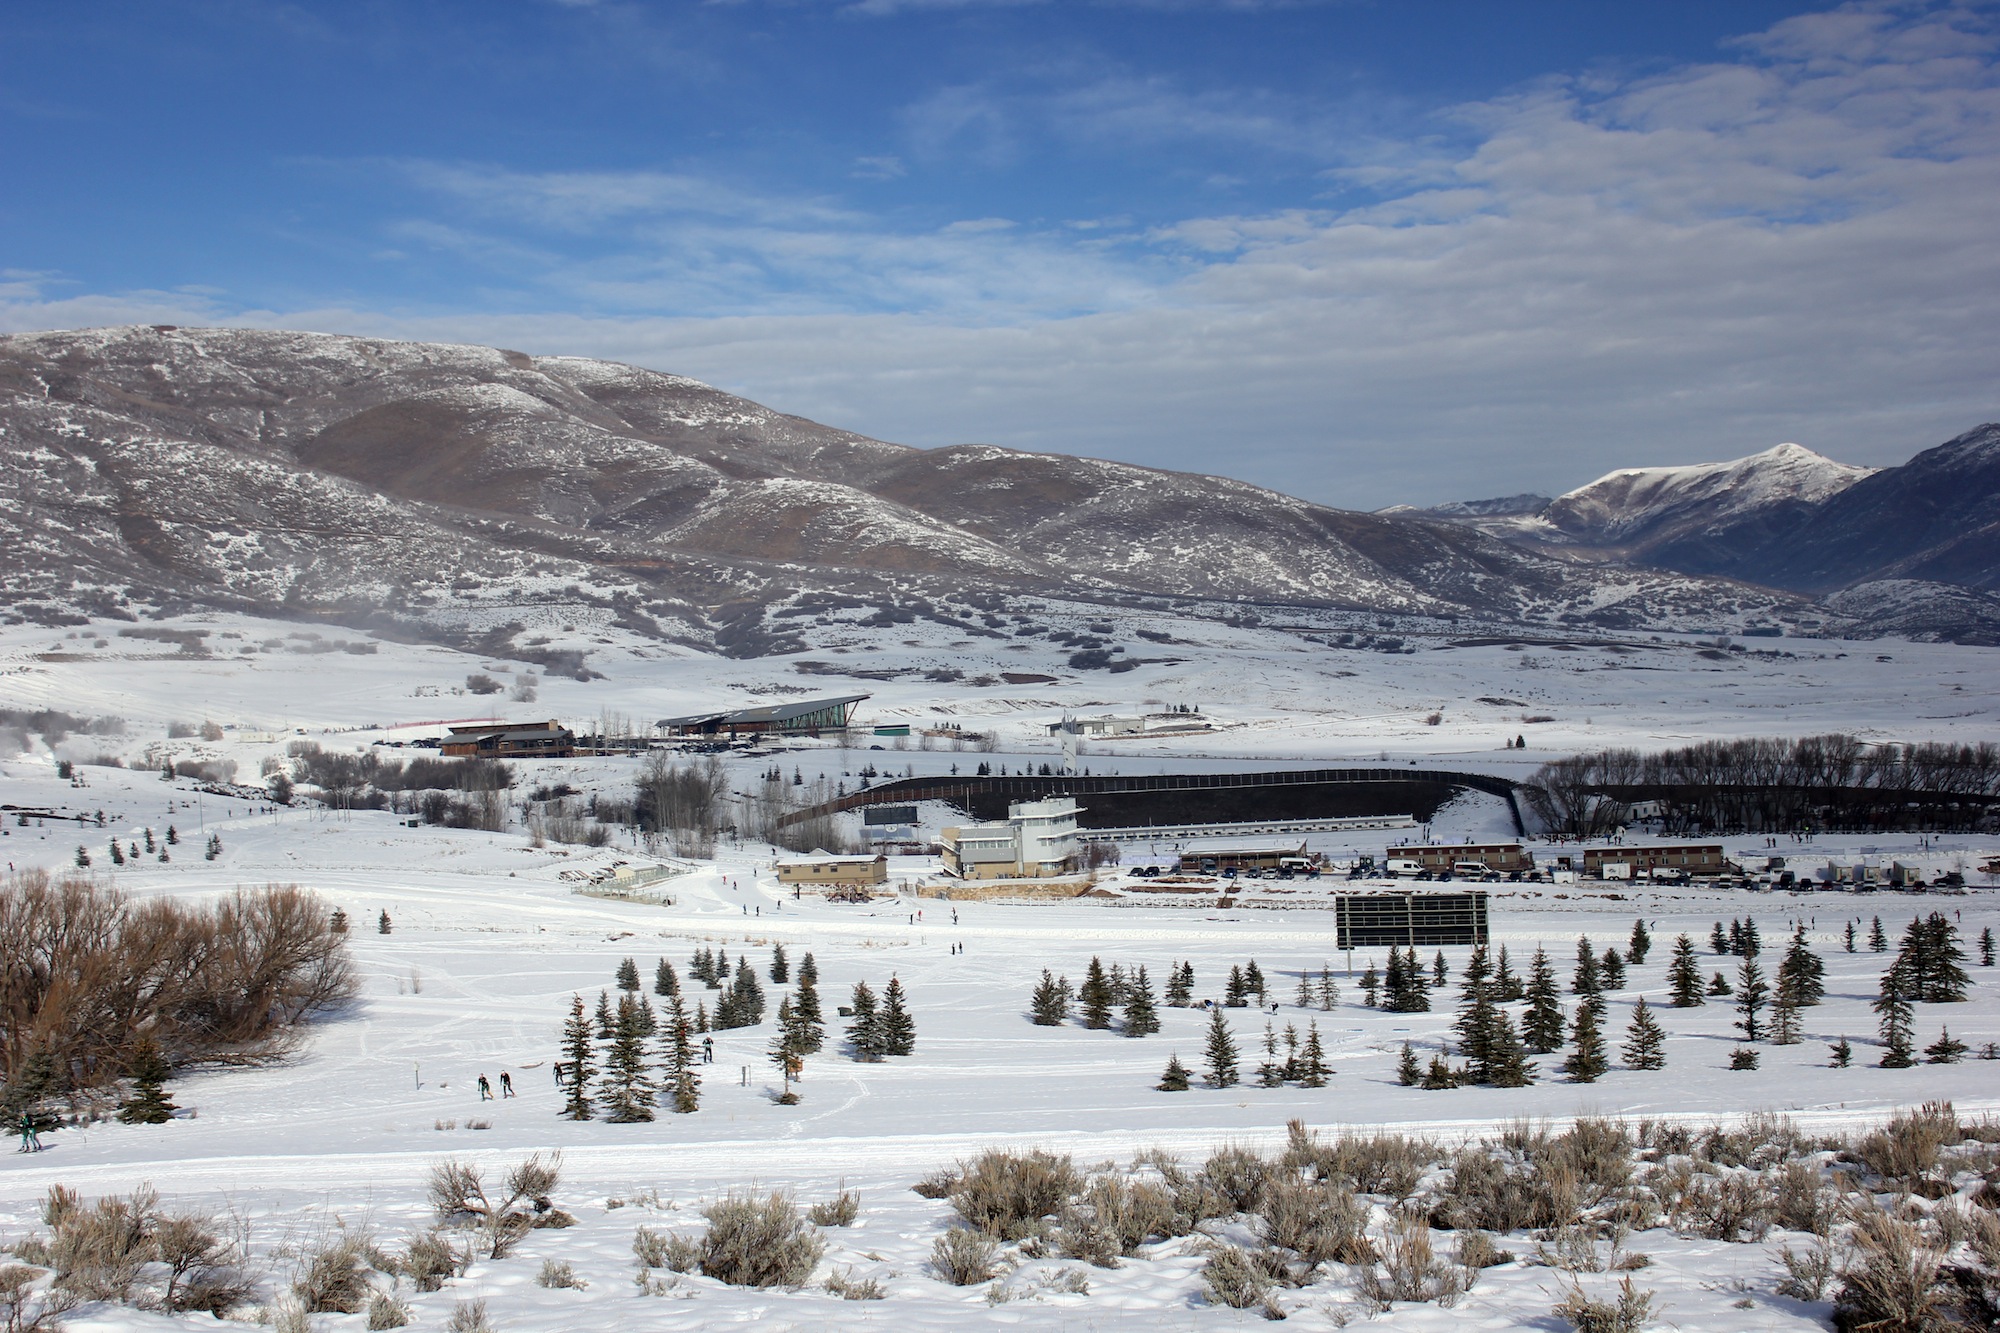 SoHo and Park City Gear Up to Host First U23/Junior Worlds in 30+ Years